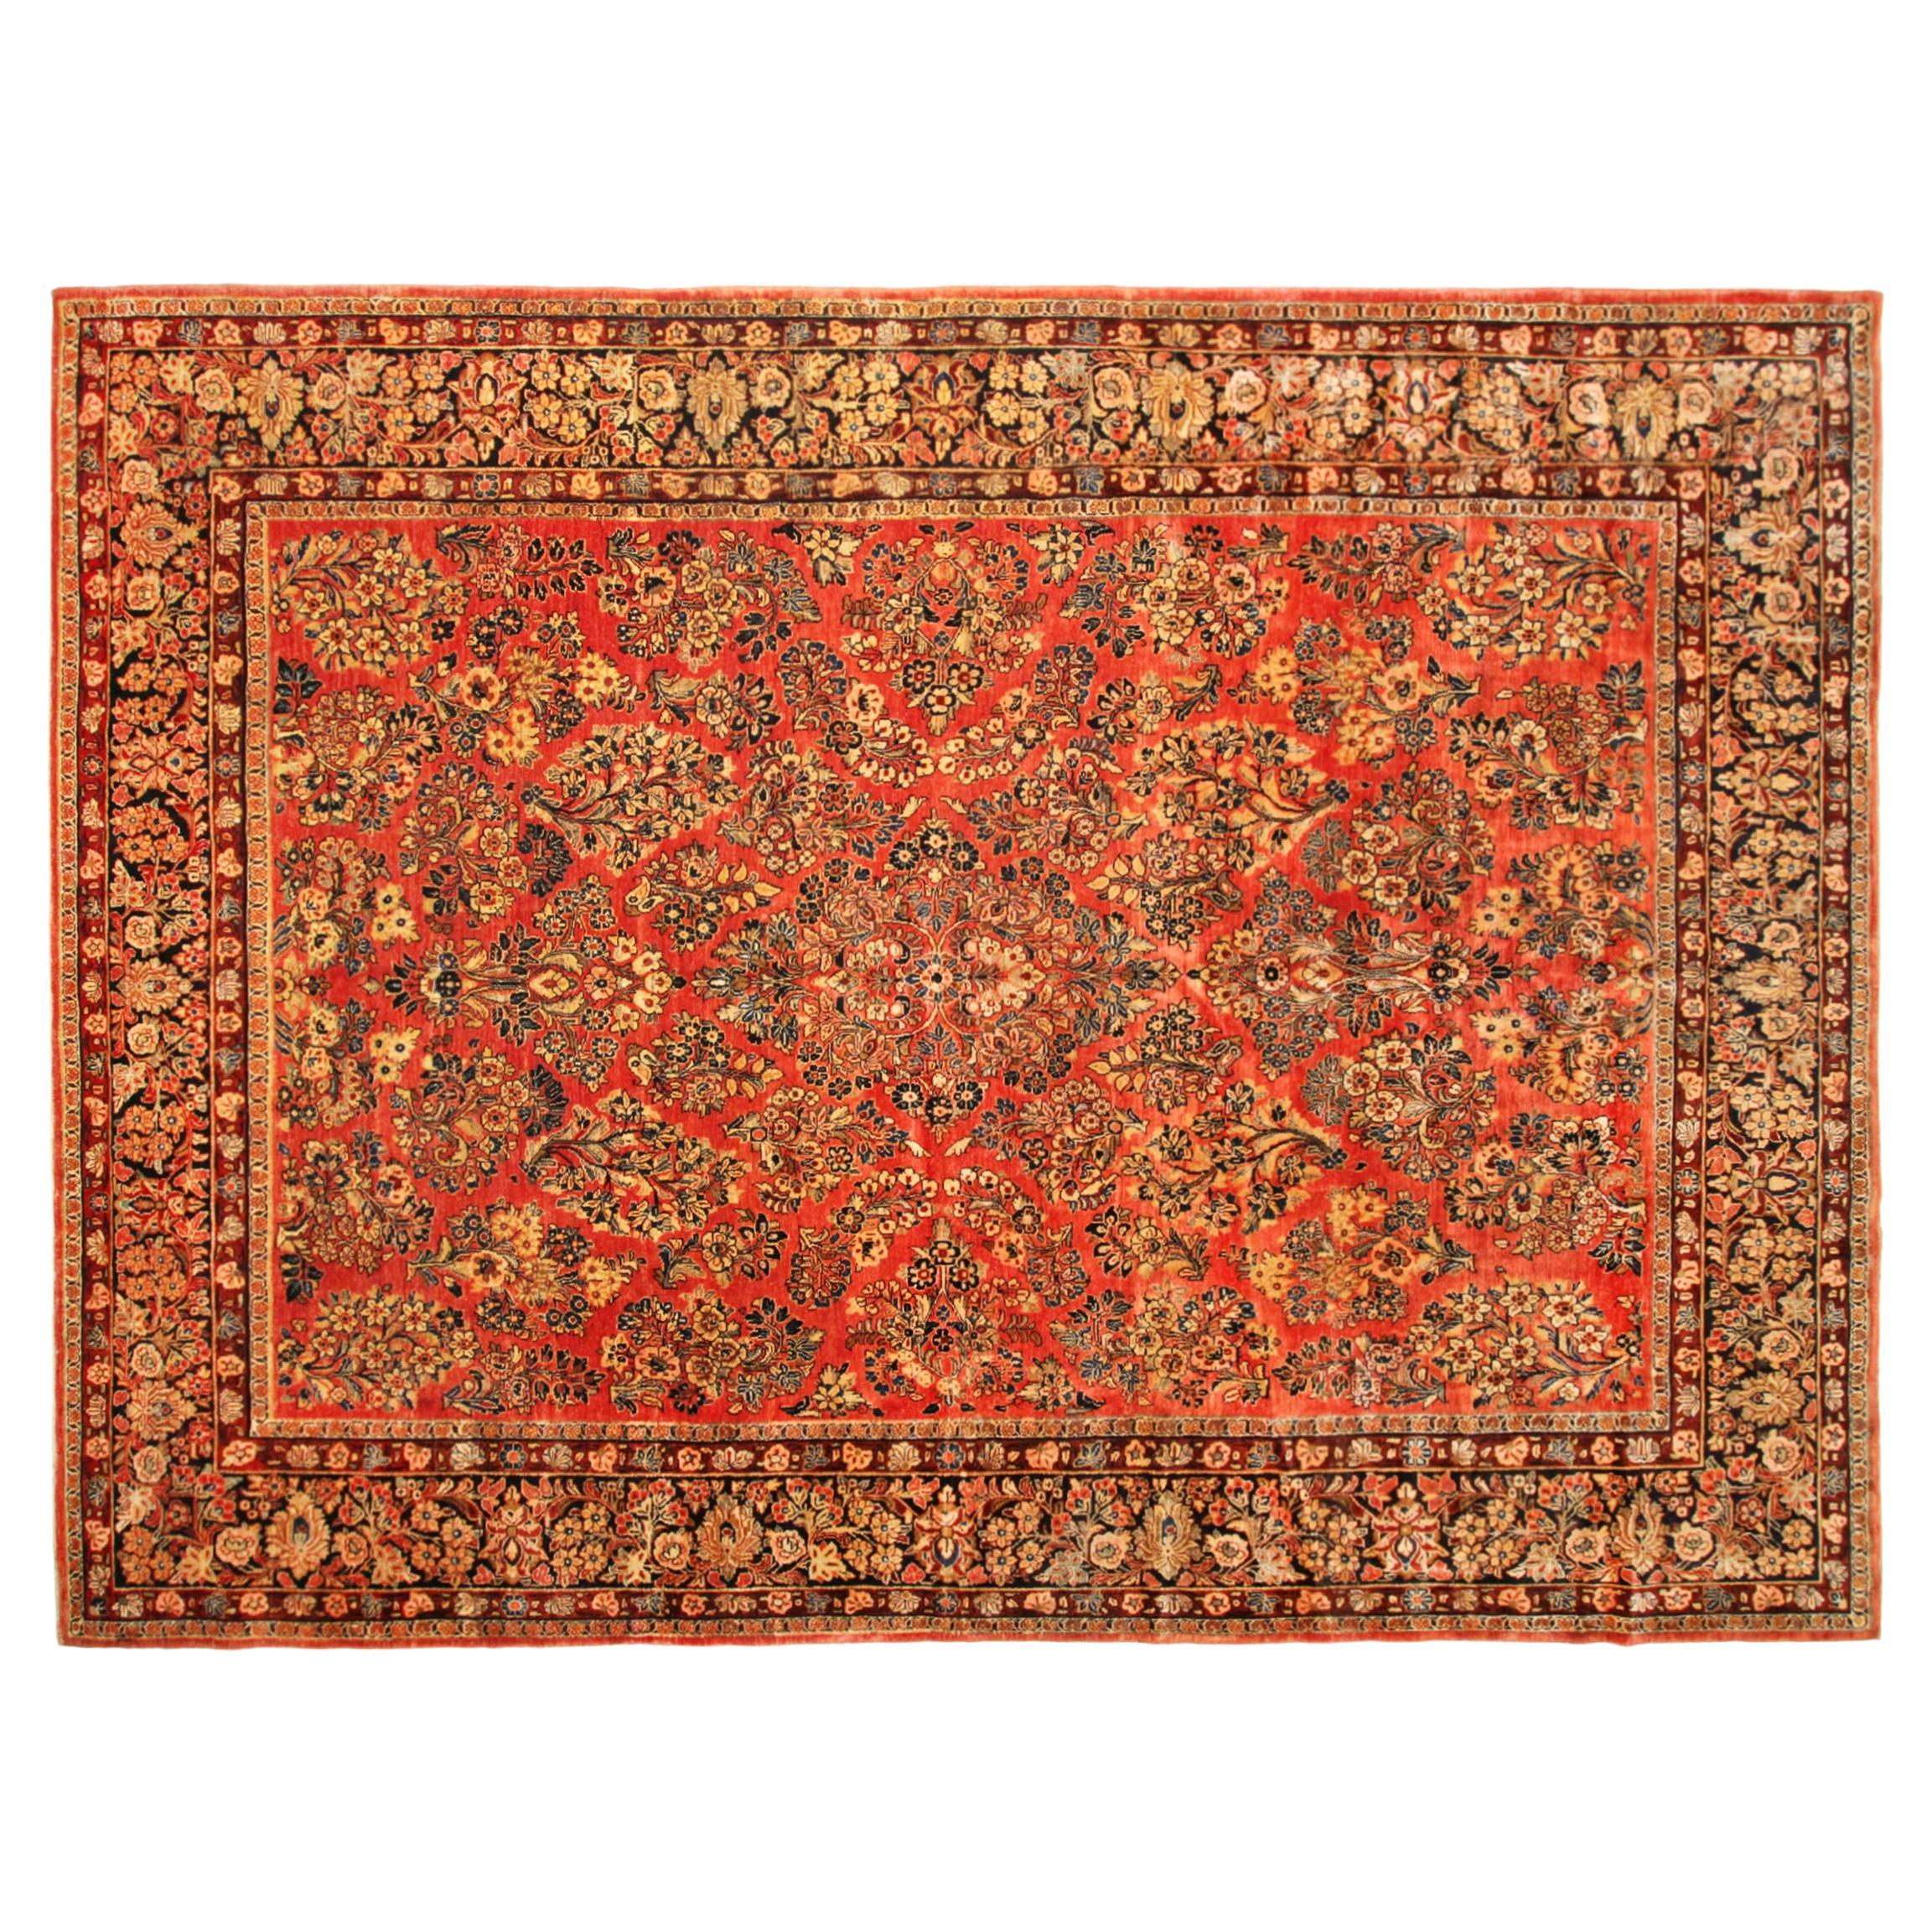 Antique Persian Sarouk Oriental Rug, in Room Size, with Intricate Floral Design For Sale